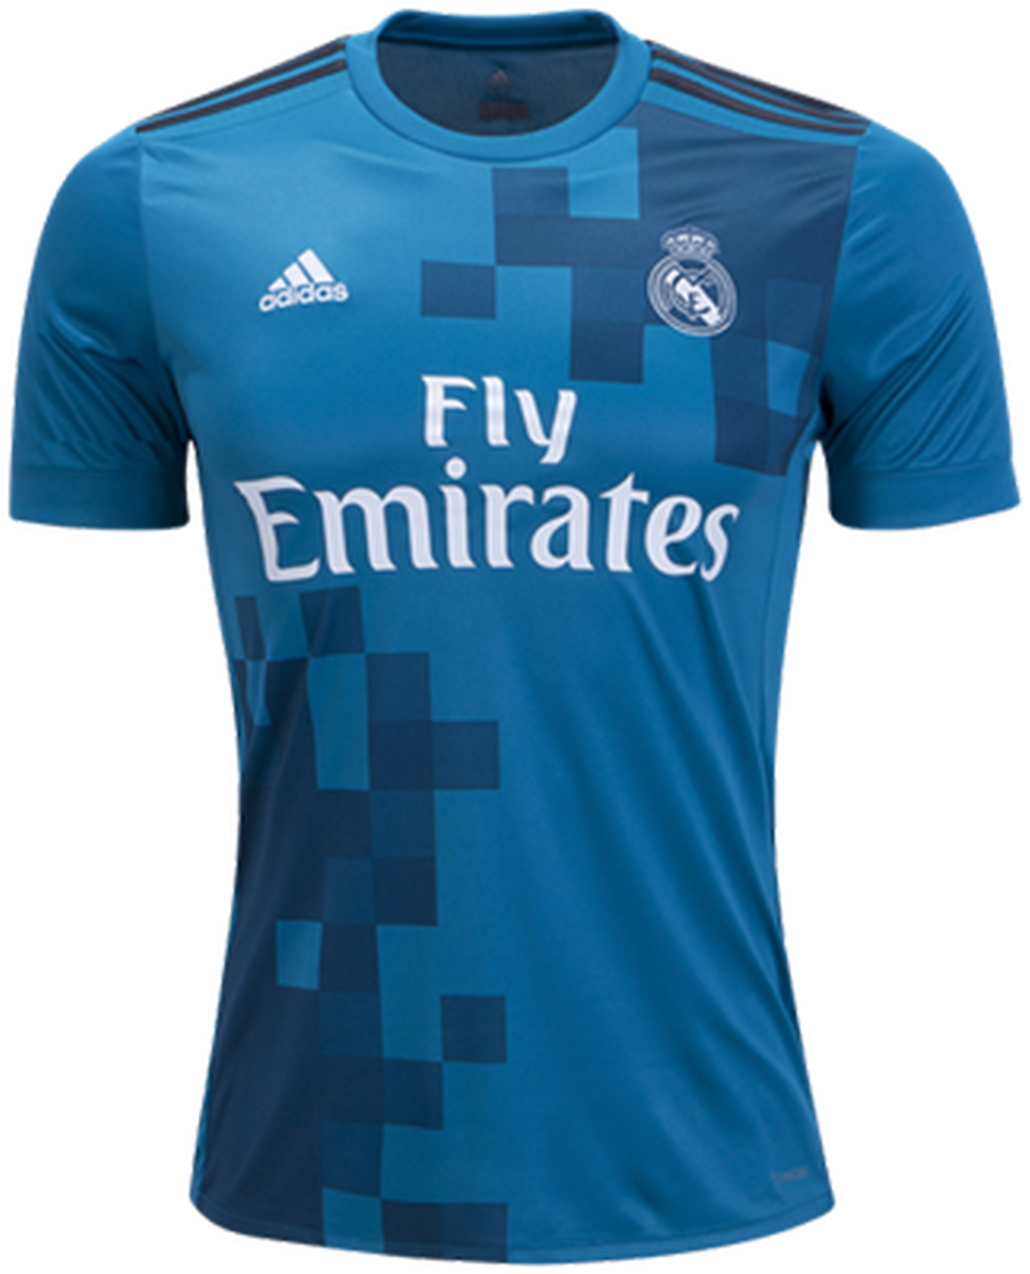 Fly Emirates Adidas Soccer Jersey